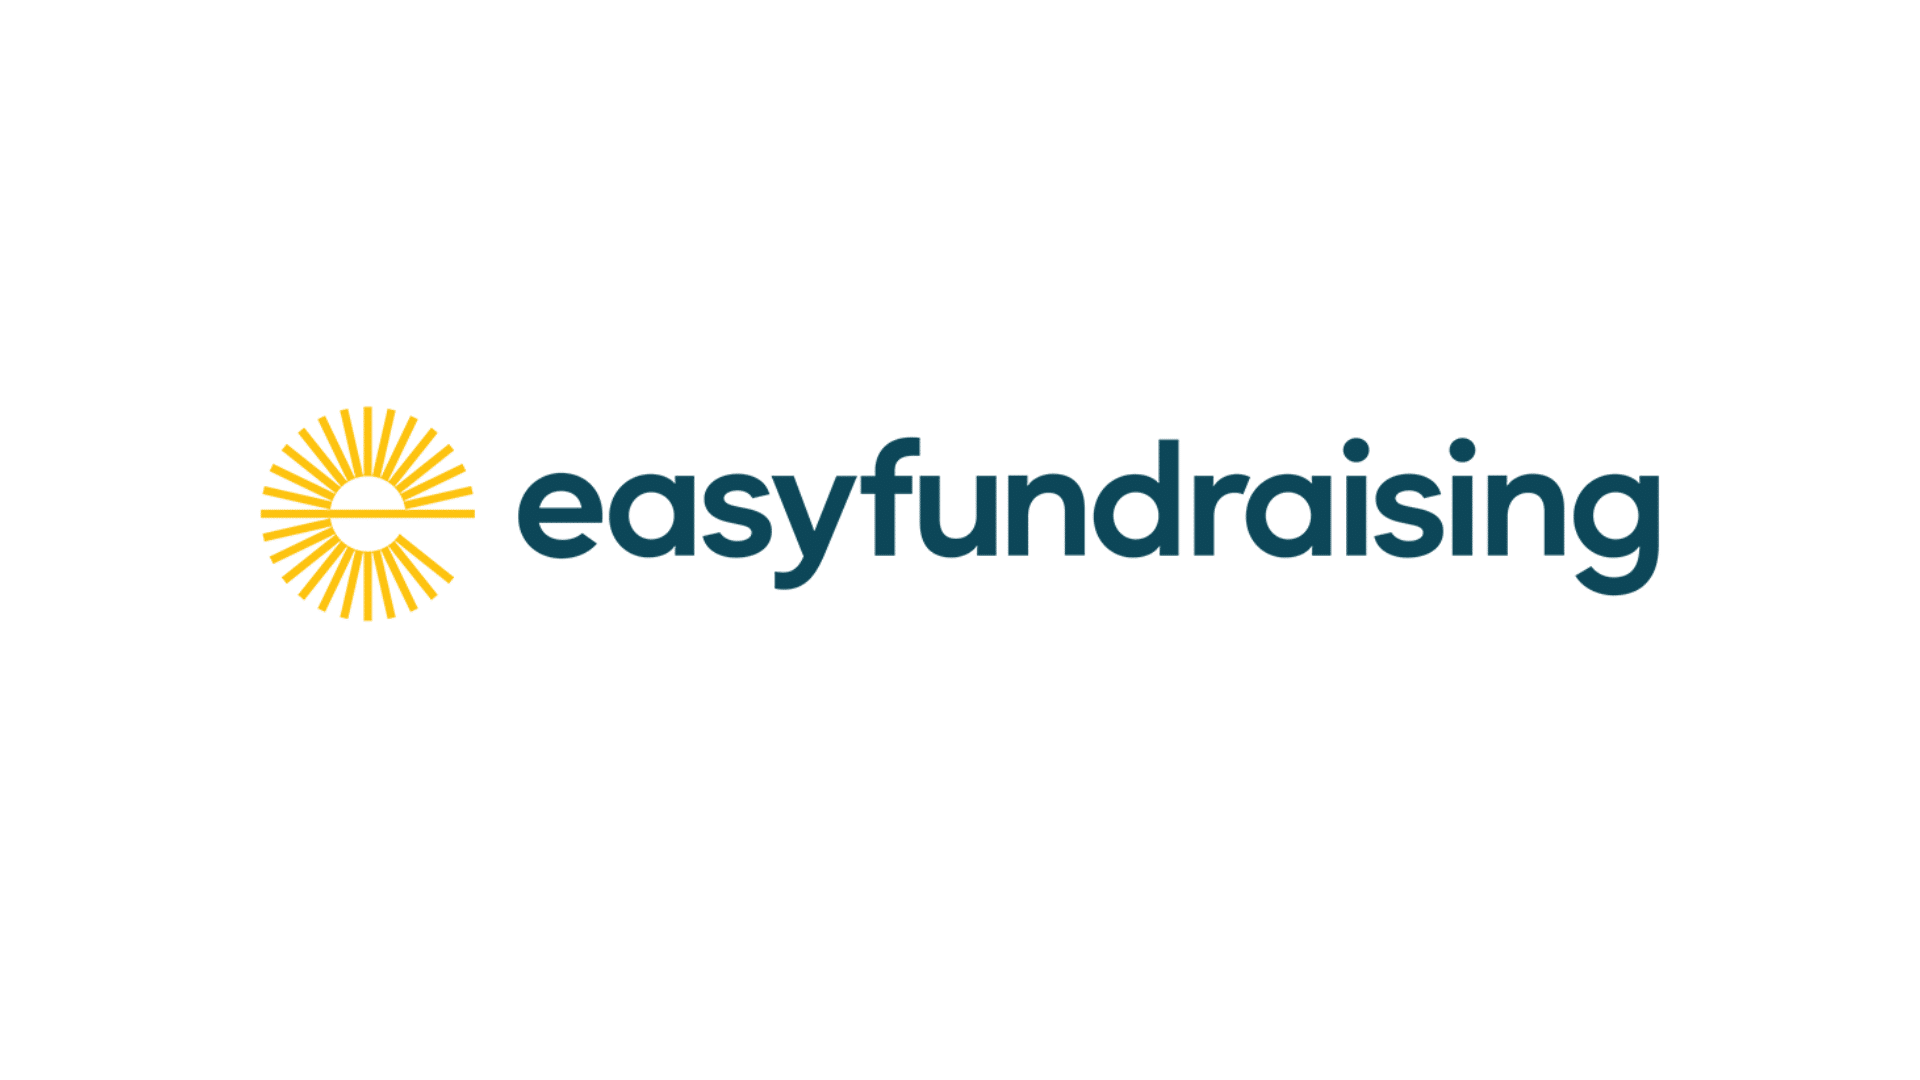 easyfundraising for Woody’s Lodge